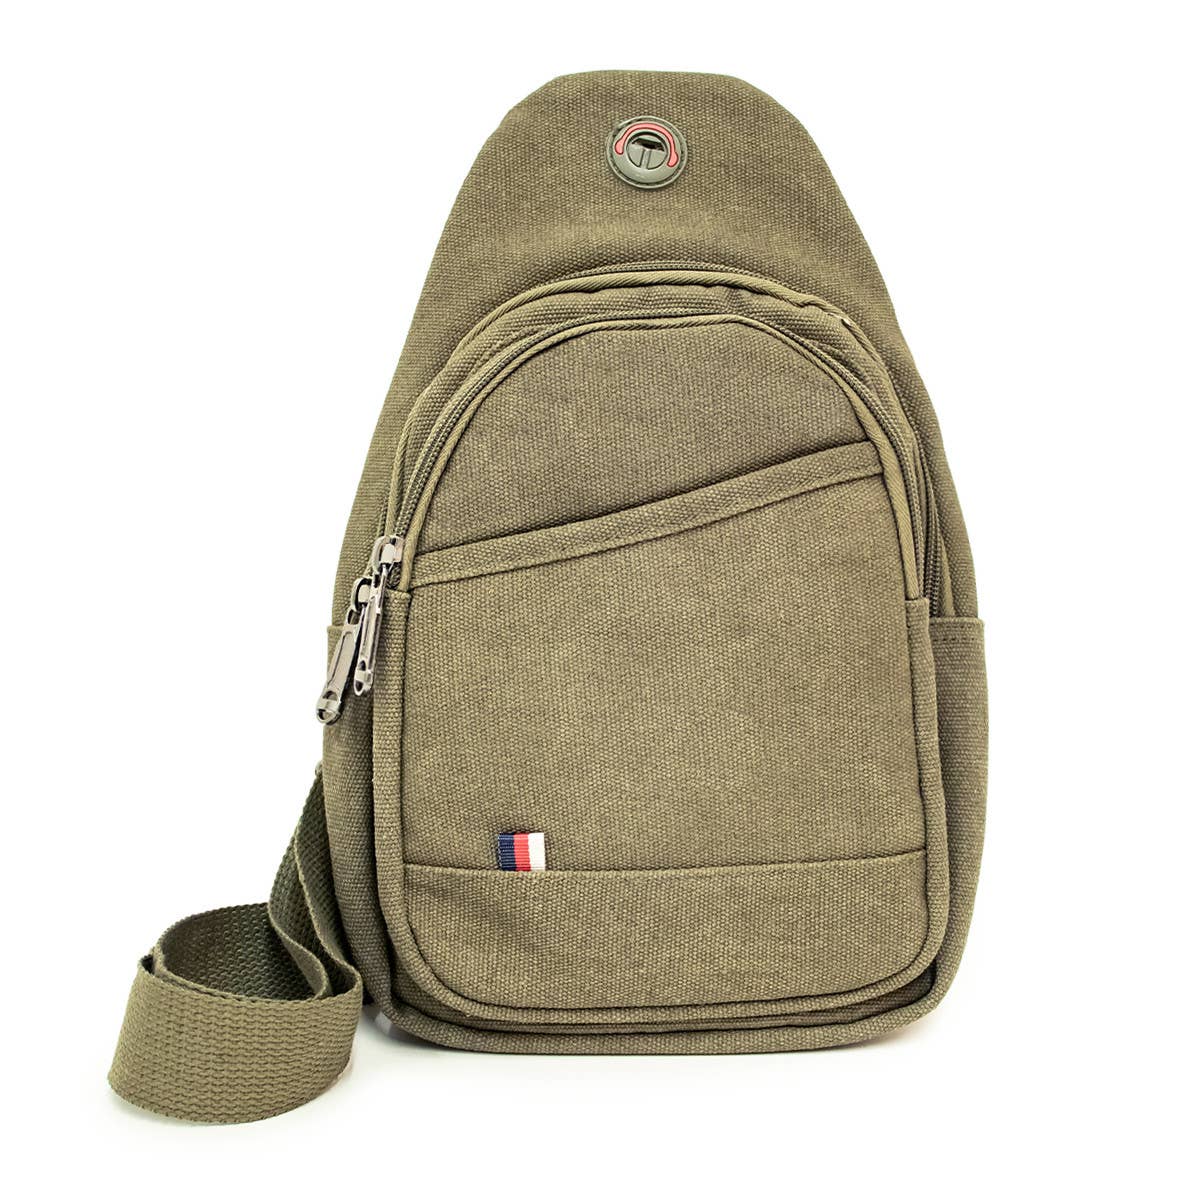 the image shows an olive crossbody bag against a white backdrop